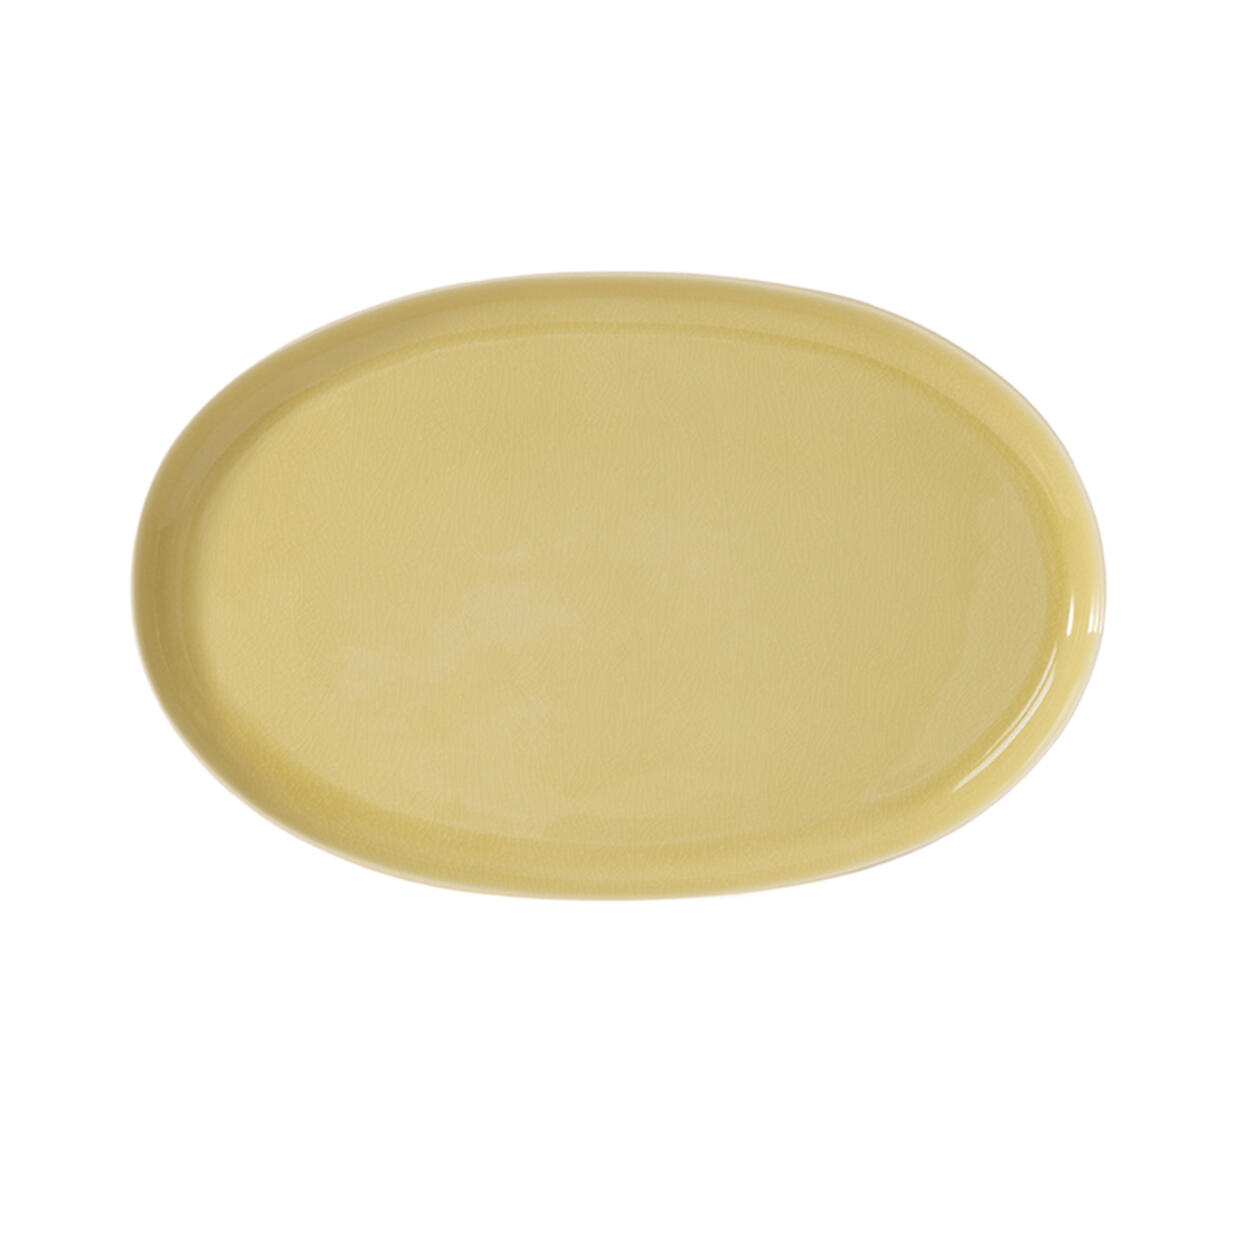 Oval tray Maguelone genêt high-end ceramic tableware